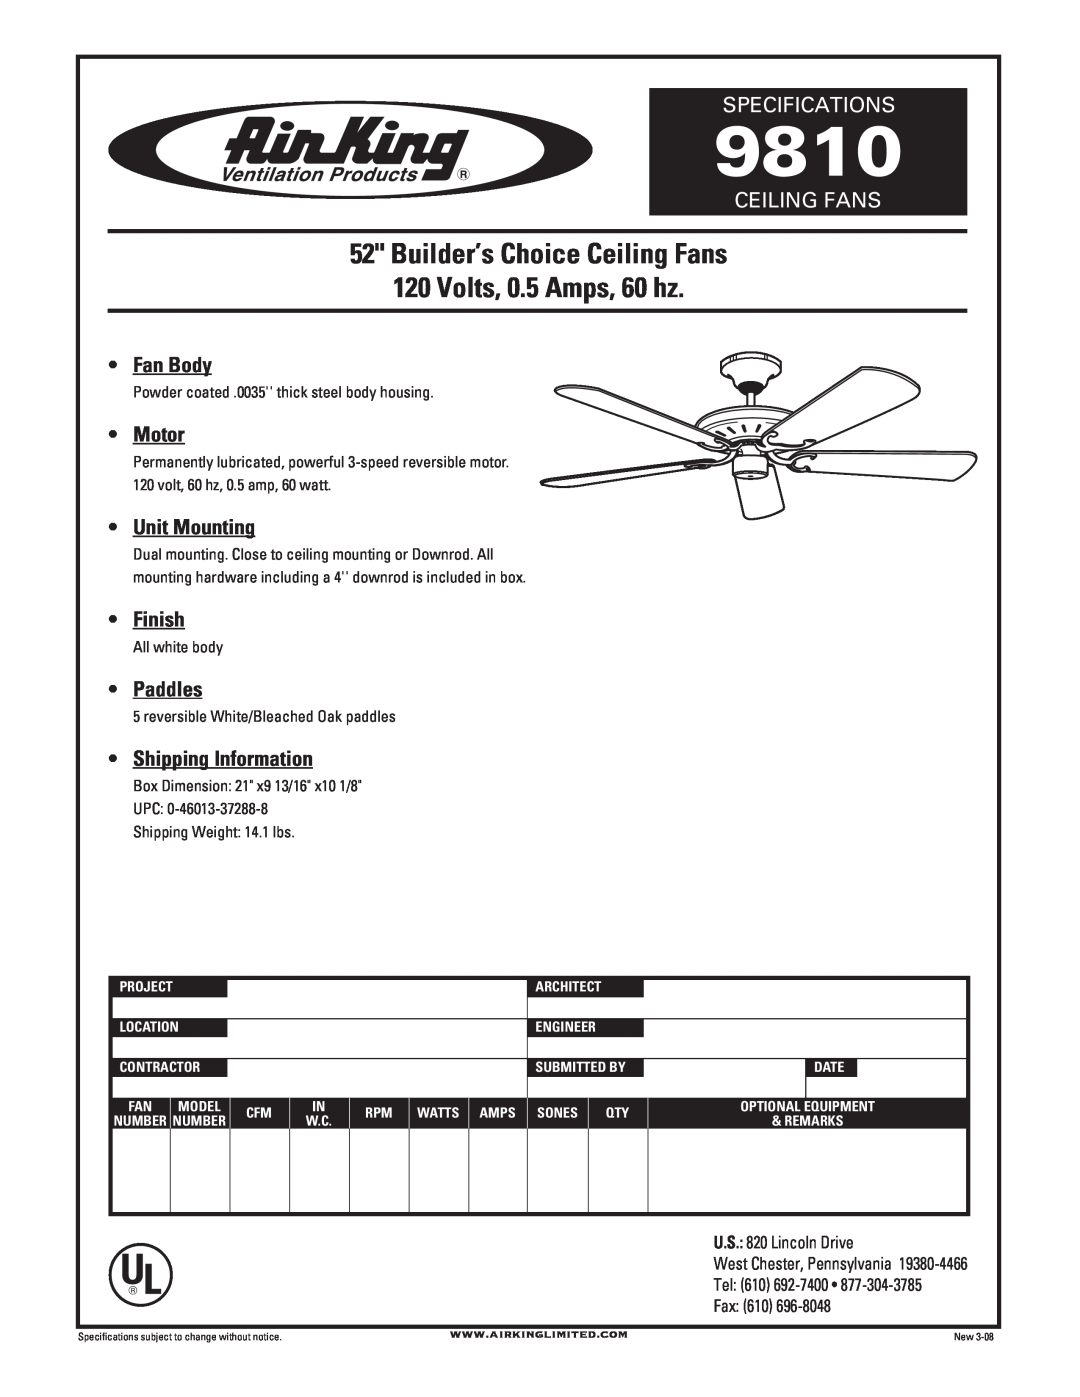 Air King 9810 specifications Builder’s Choice Ceiling Fans 120 Volts, 0.5 Amps, 60 hz, Specifications, Fan Body, Motor 